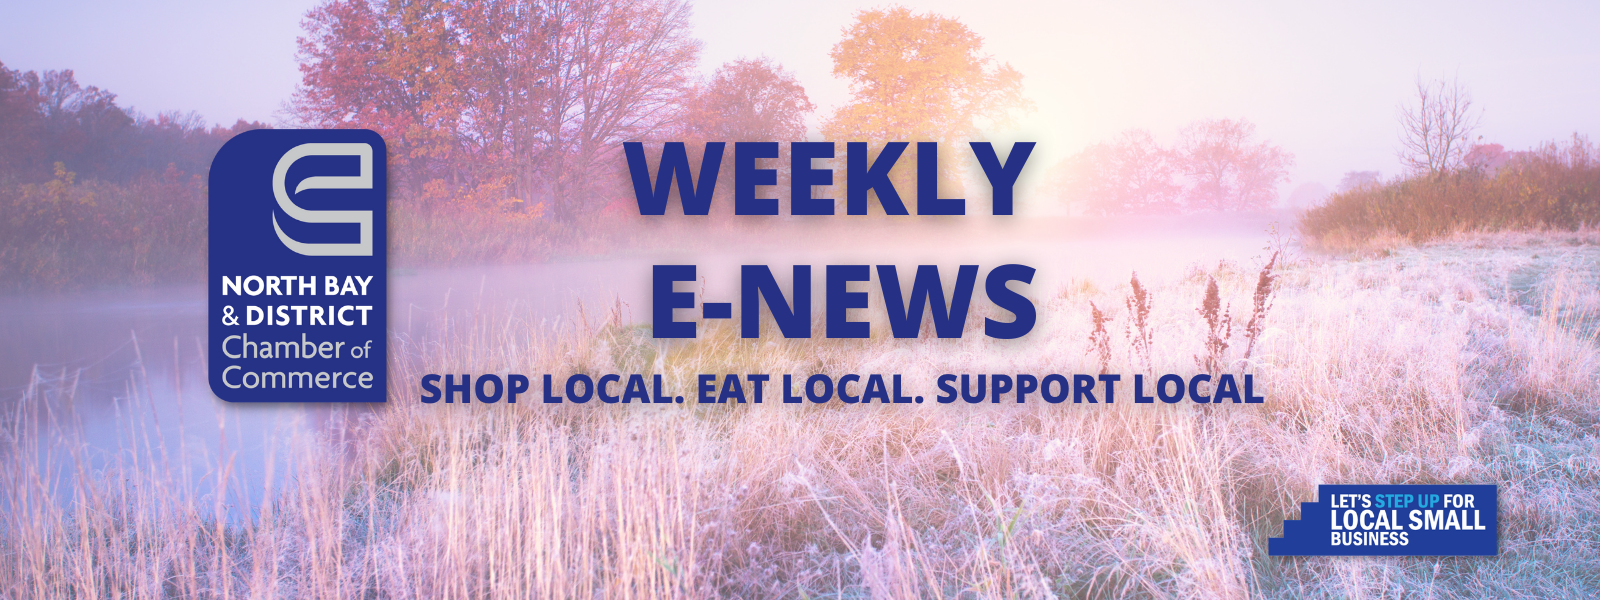 Weekly E-News - North Bay and District Chamber of Commerce-November